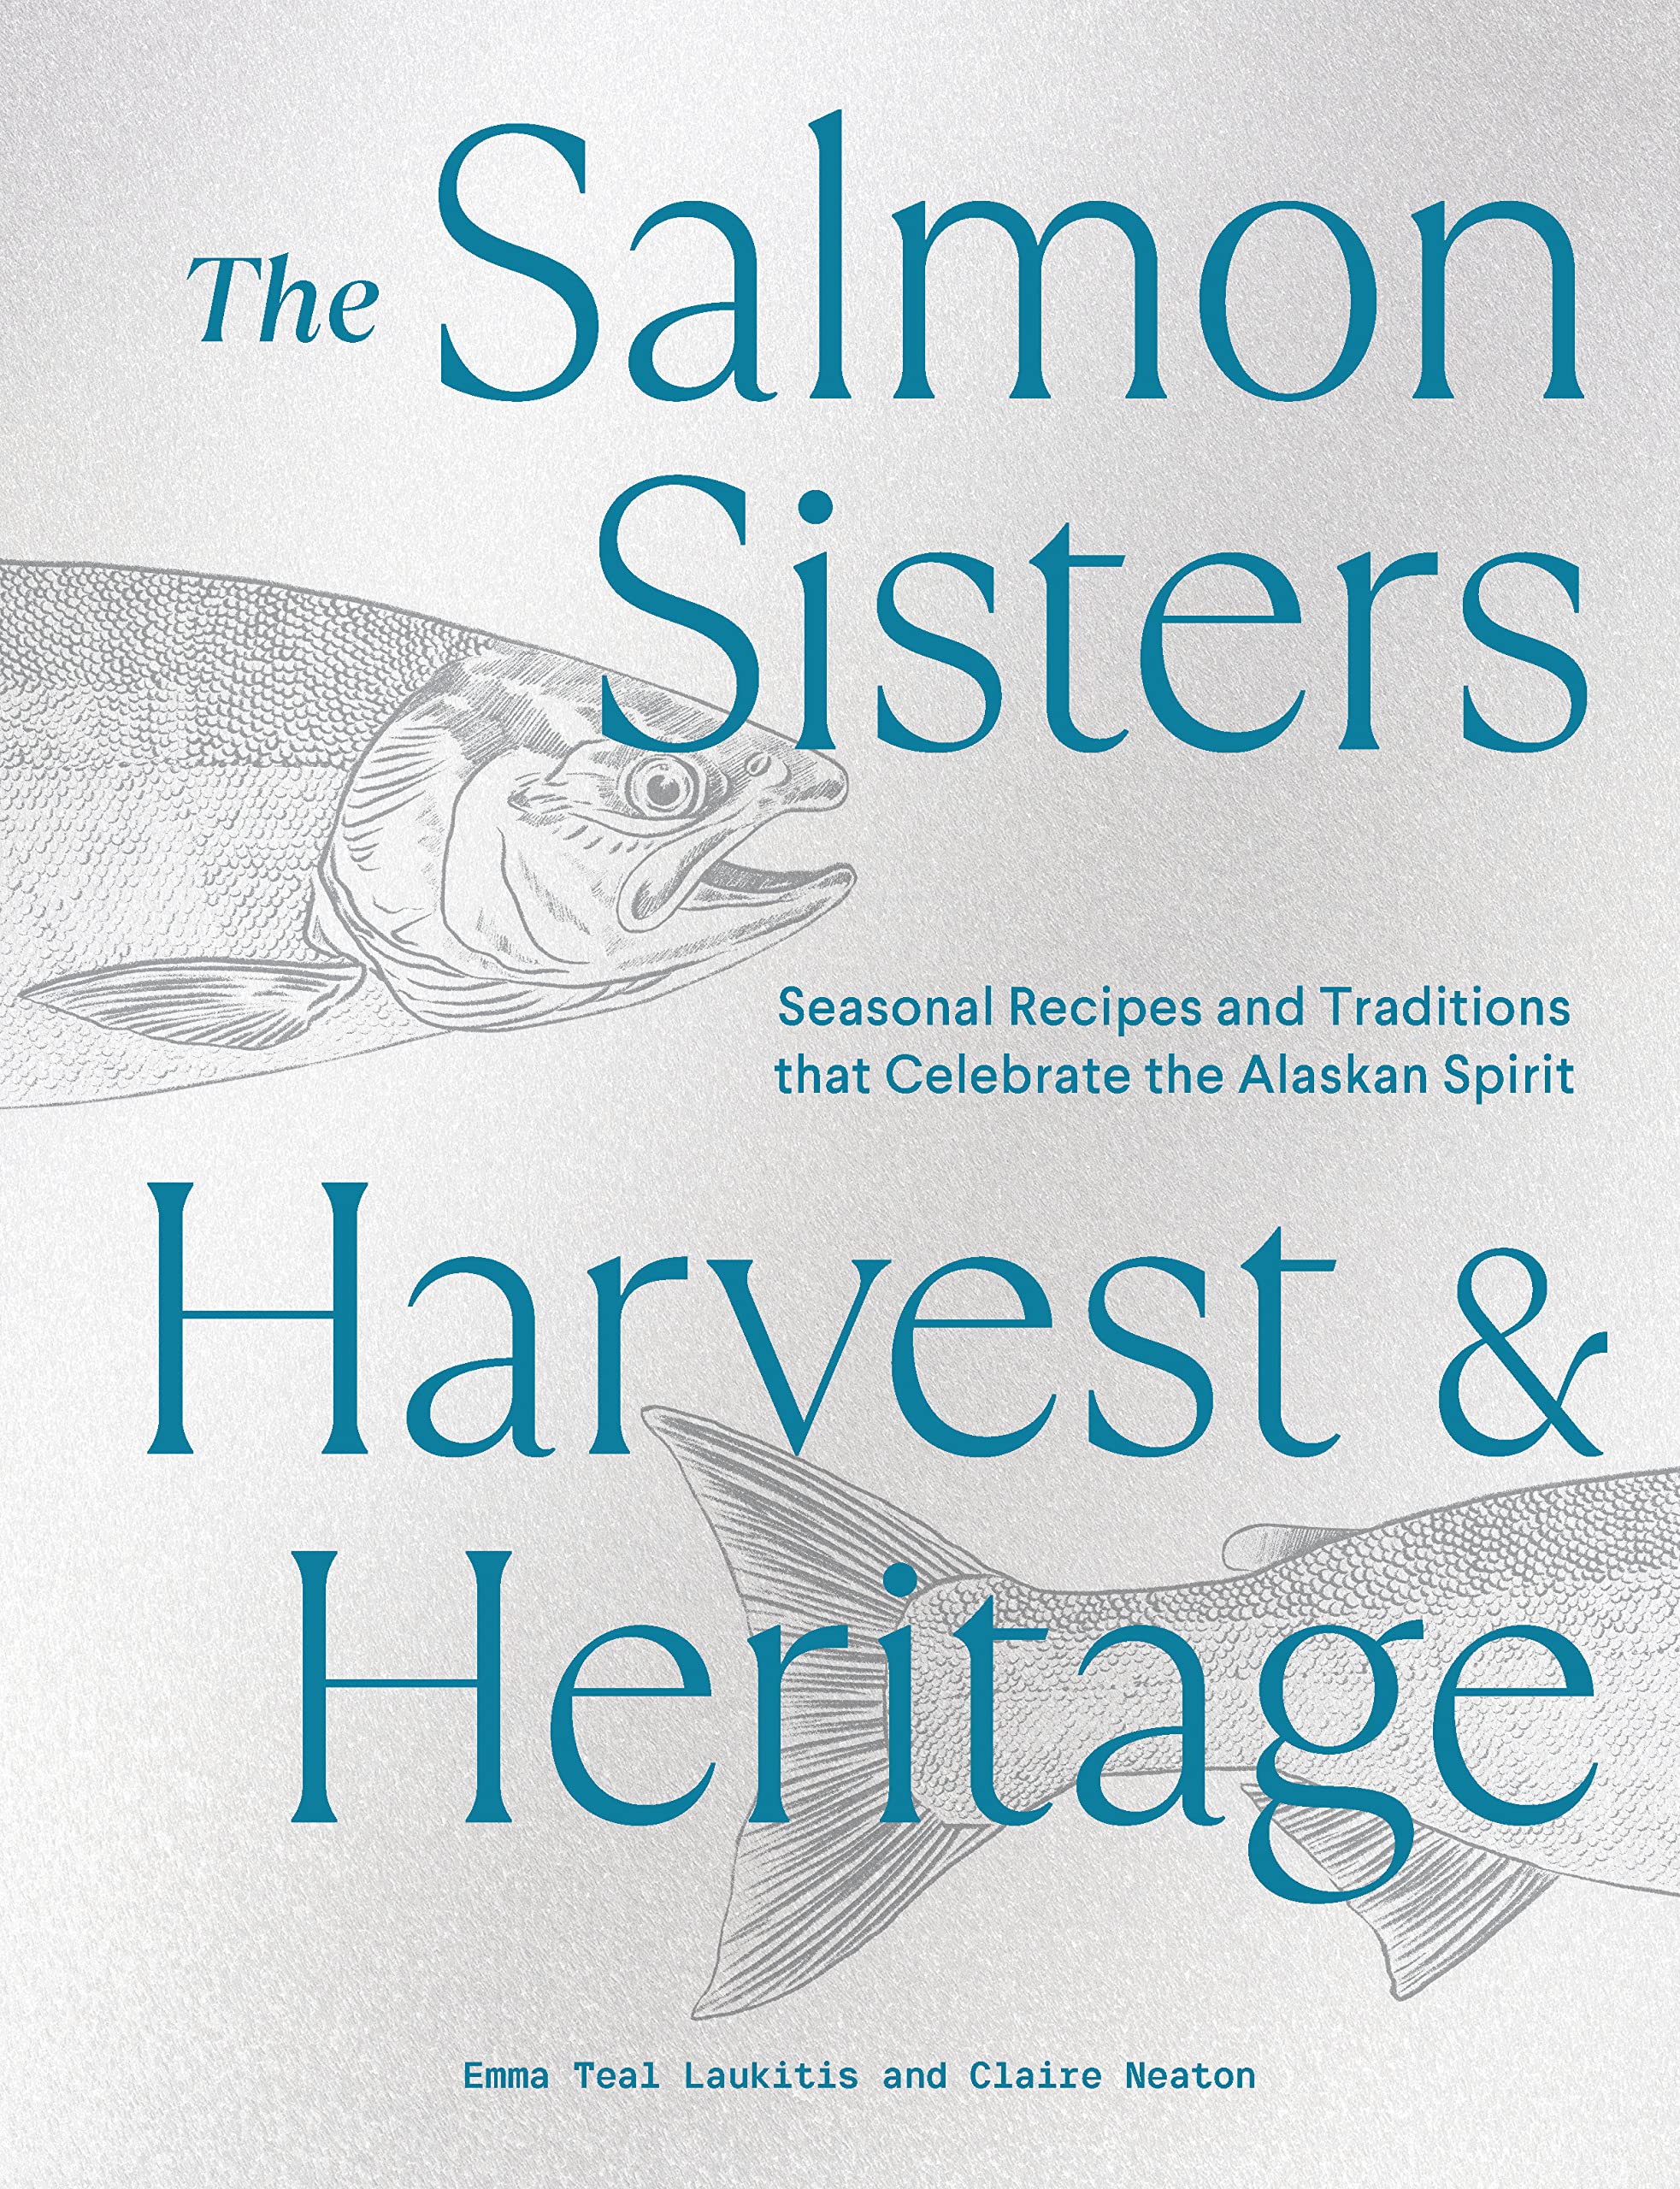 The Salmon Sisters: Harvest & Heritage: Seasonal Recipes and Traditions that Celebrate the Alaskan Spirit (Emma Teal Laukitis, Claire Neaton)